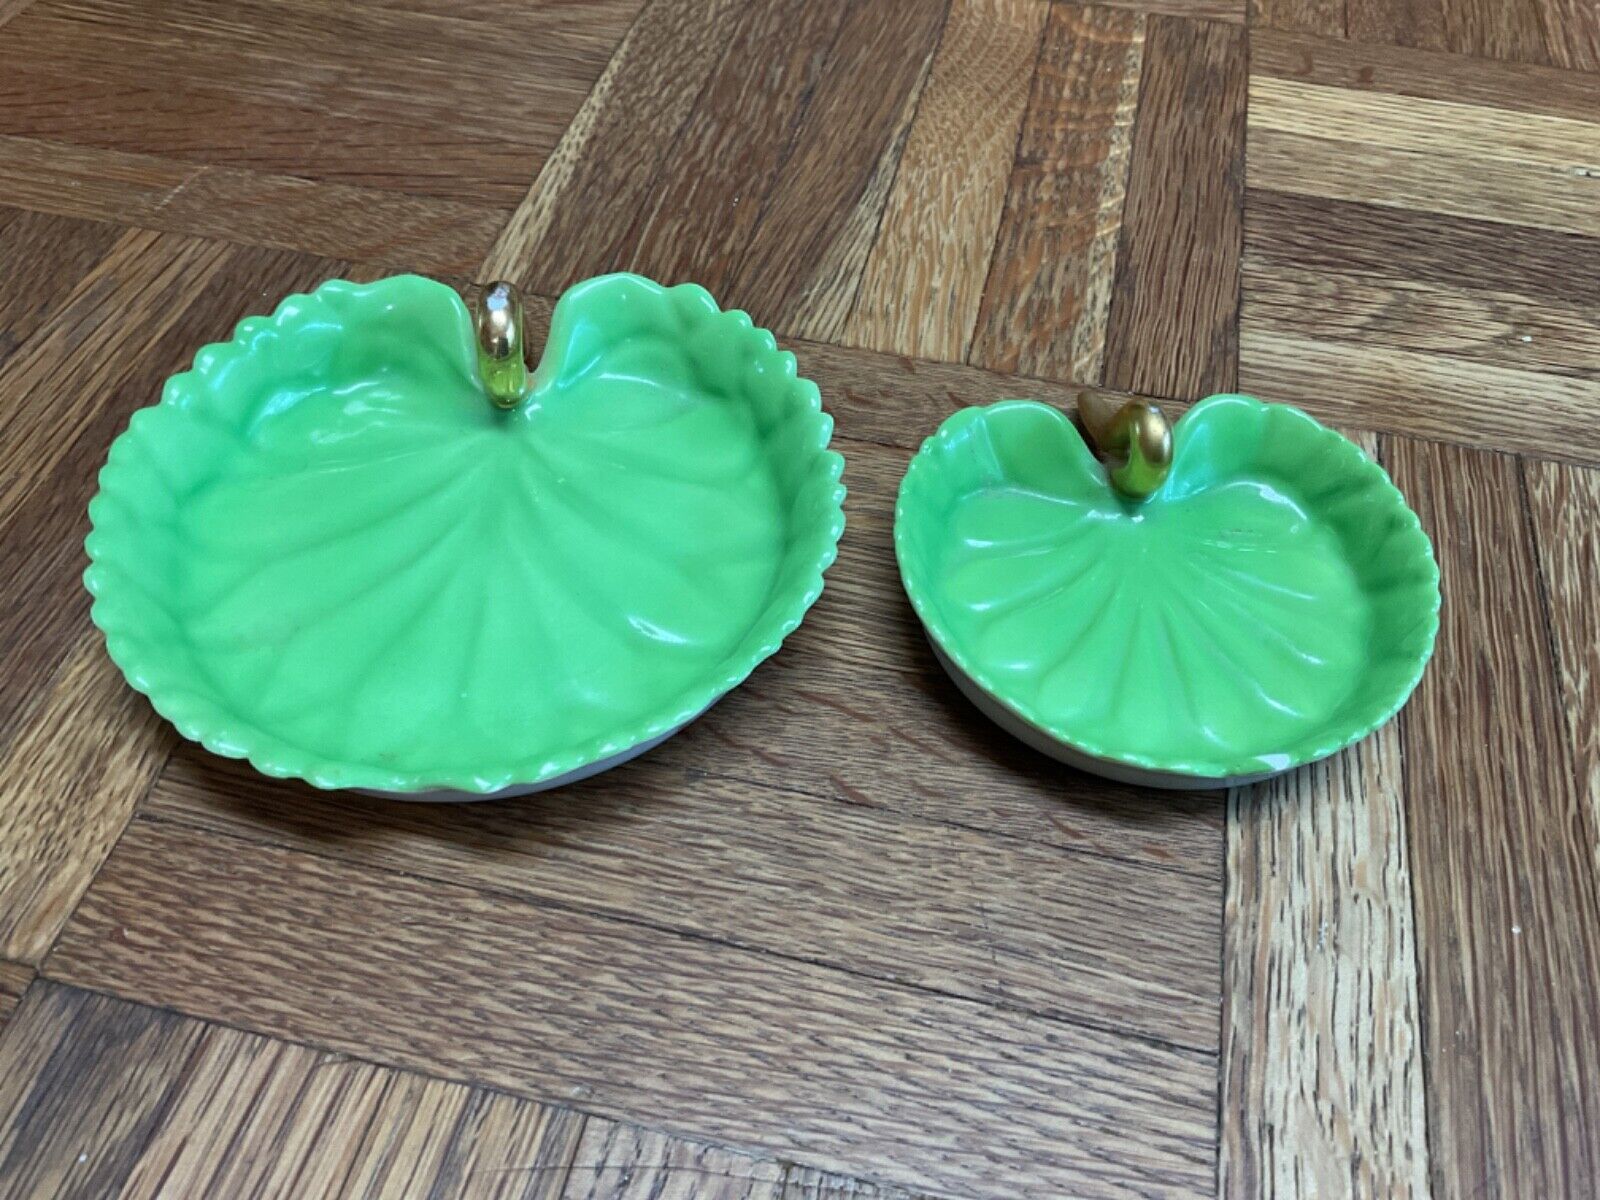 Lot of 2 Herend Handcrafted Porcelain Green Lily Pad Ring Dish Tray #9135 & 9136